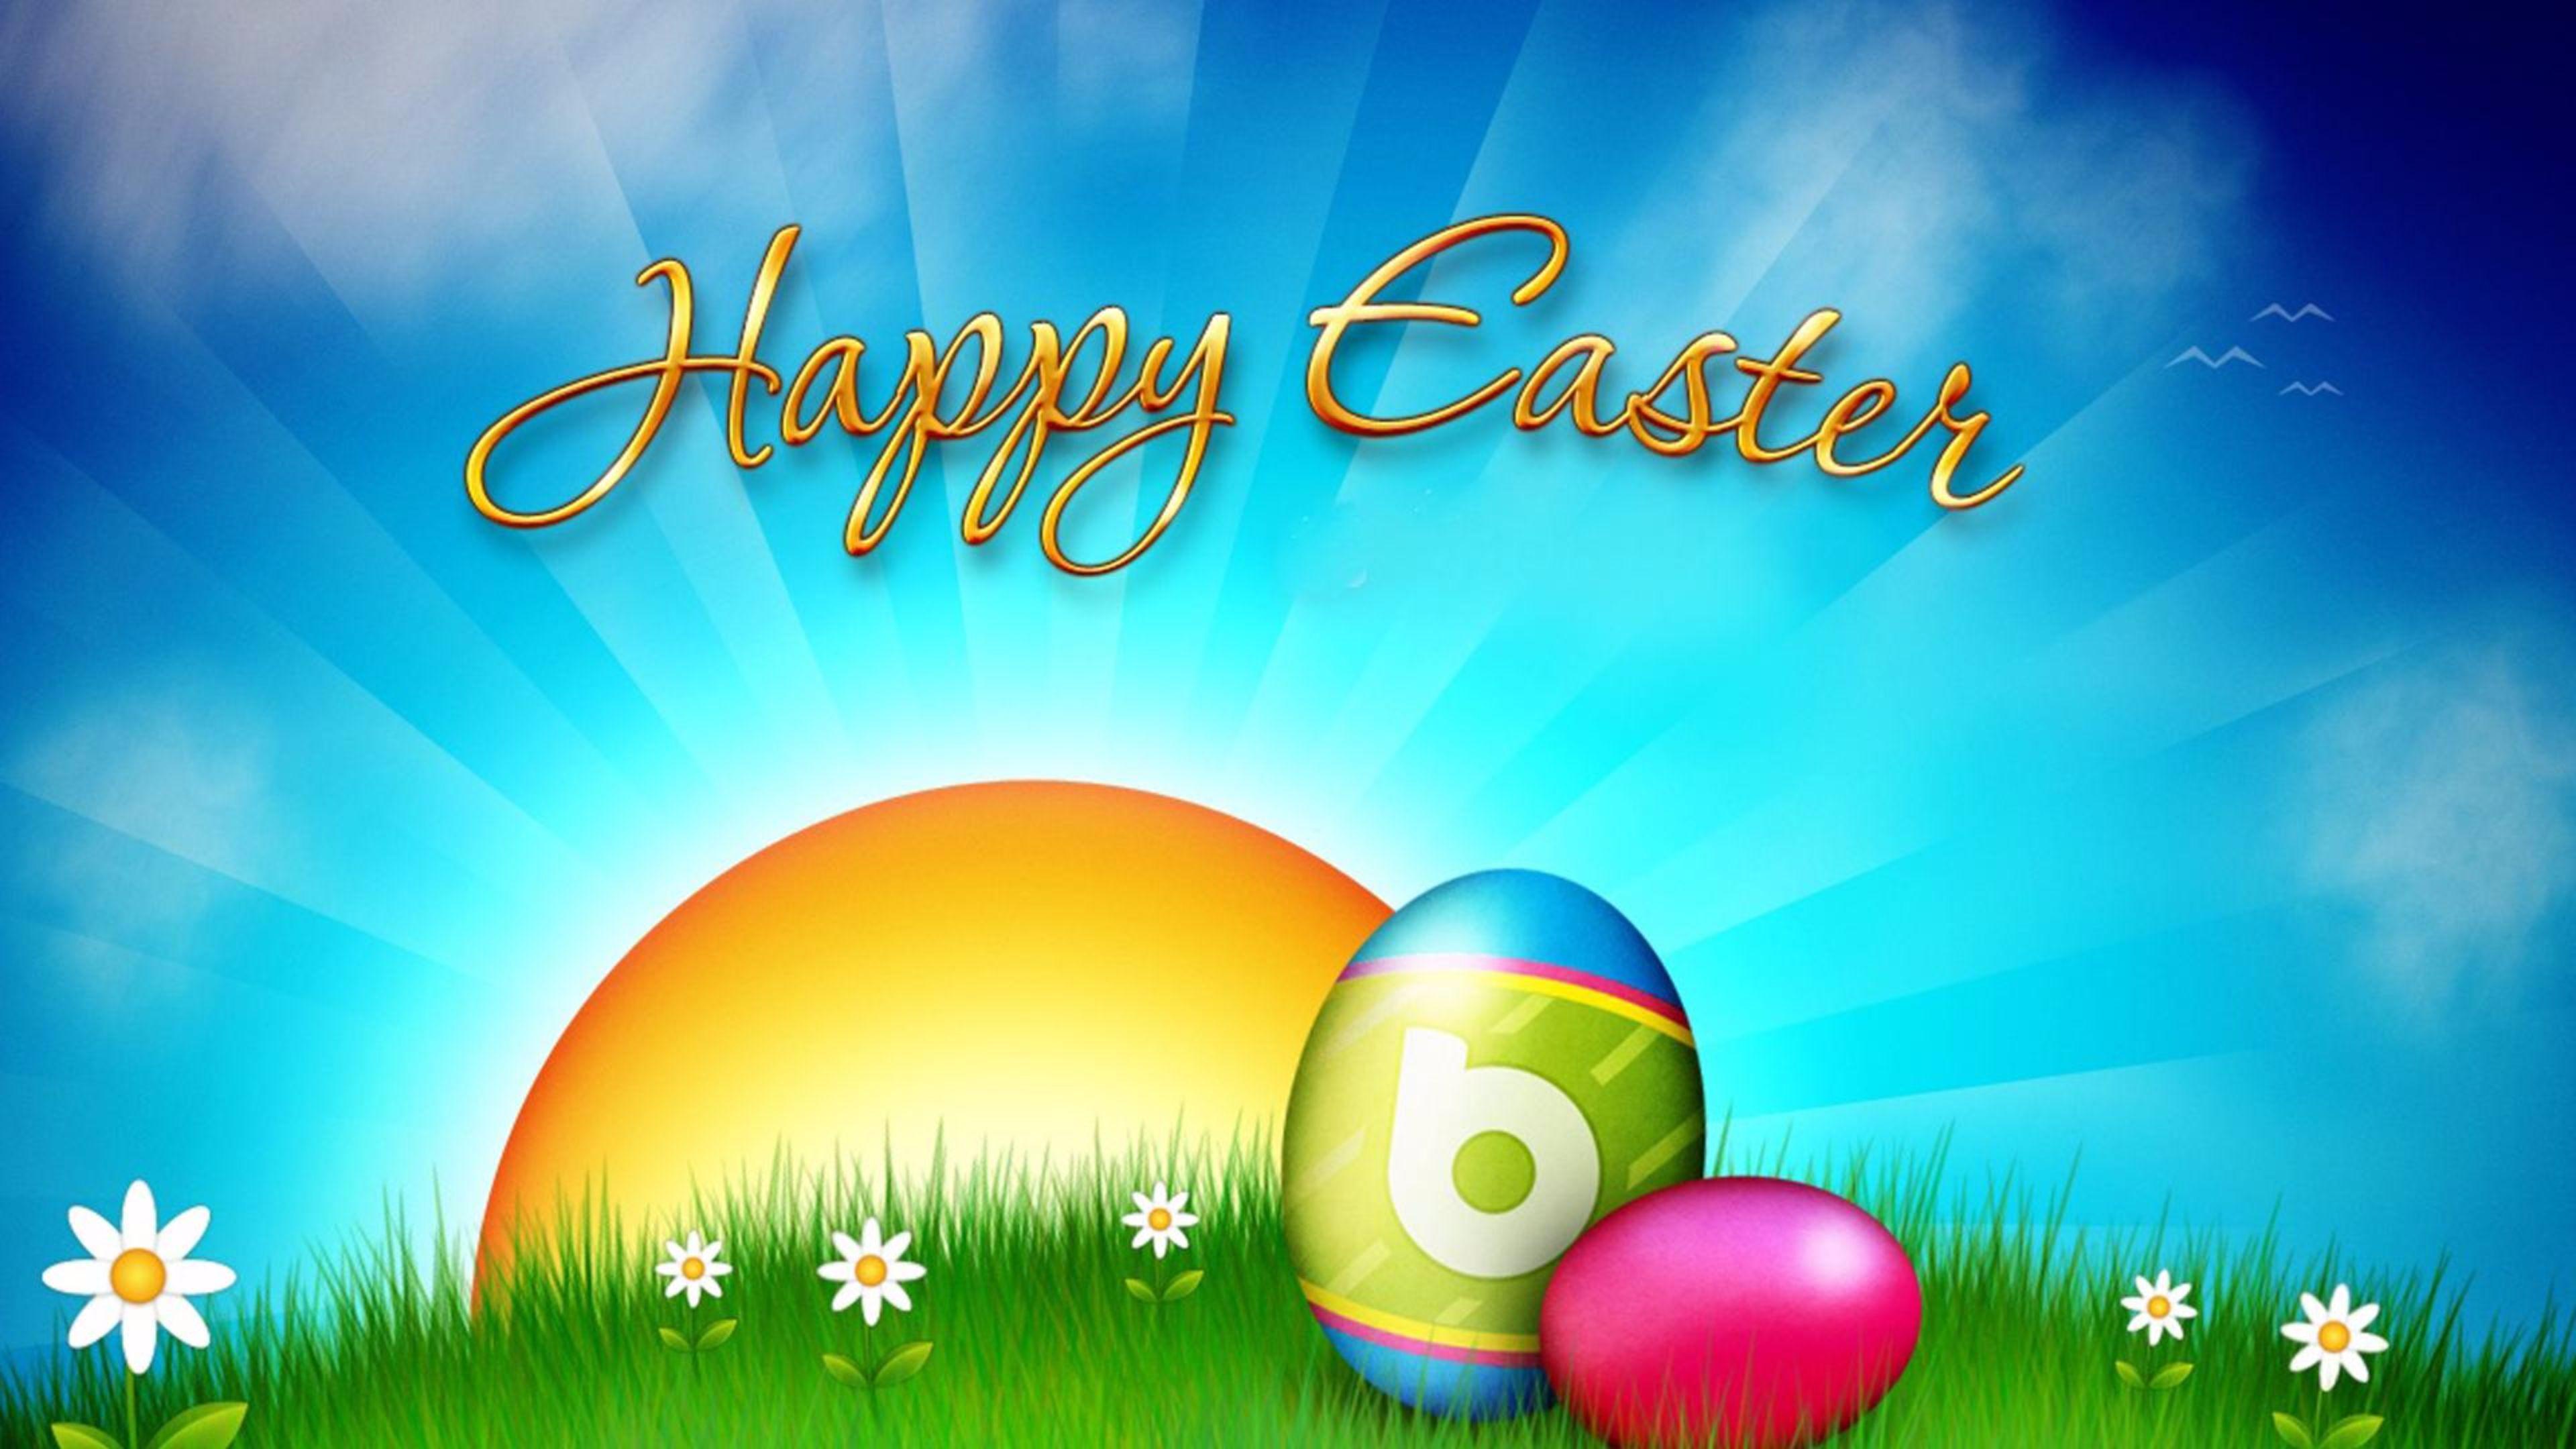 Easter 4K wallpaper for your desktop or mobile screen free and easy to download